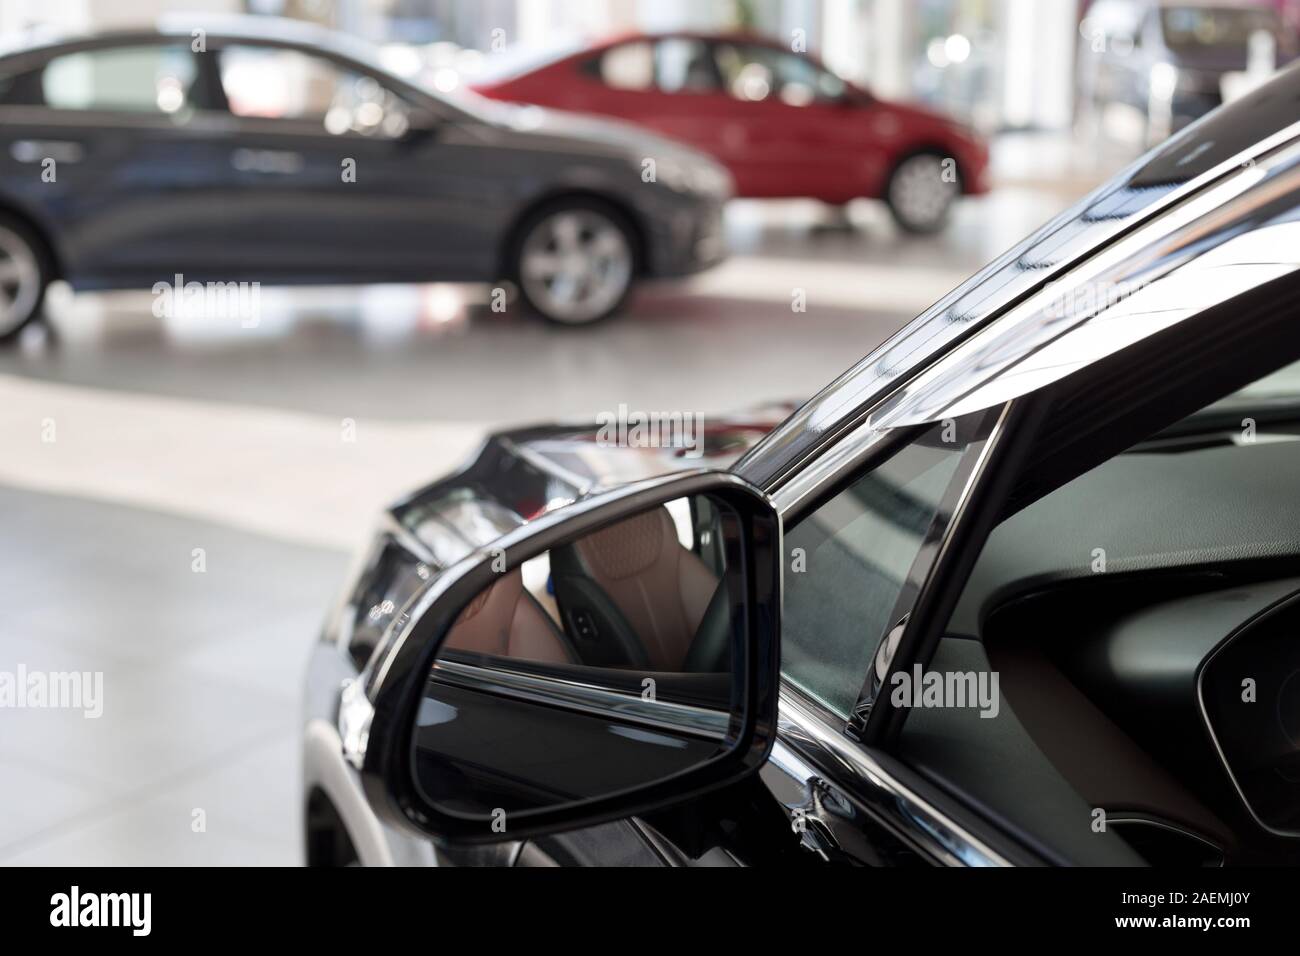 New cars at dealer showroom. Themed blur background with bokeh effect. Car auto dealership. Prestigious vehicles. Stock Photo